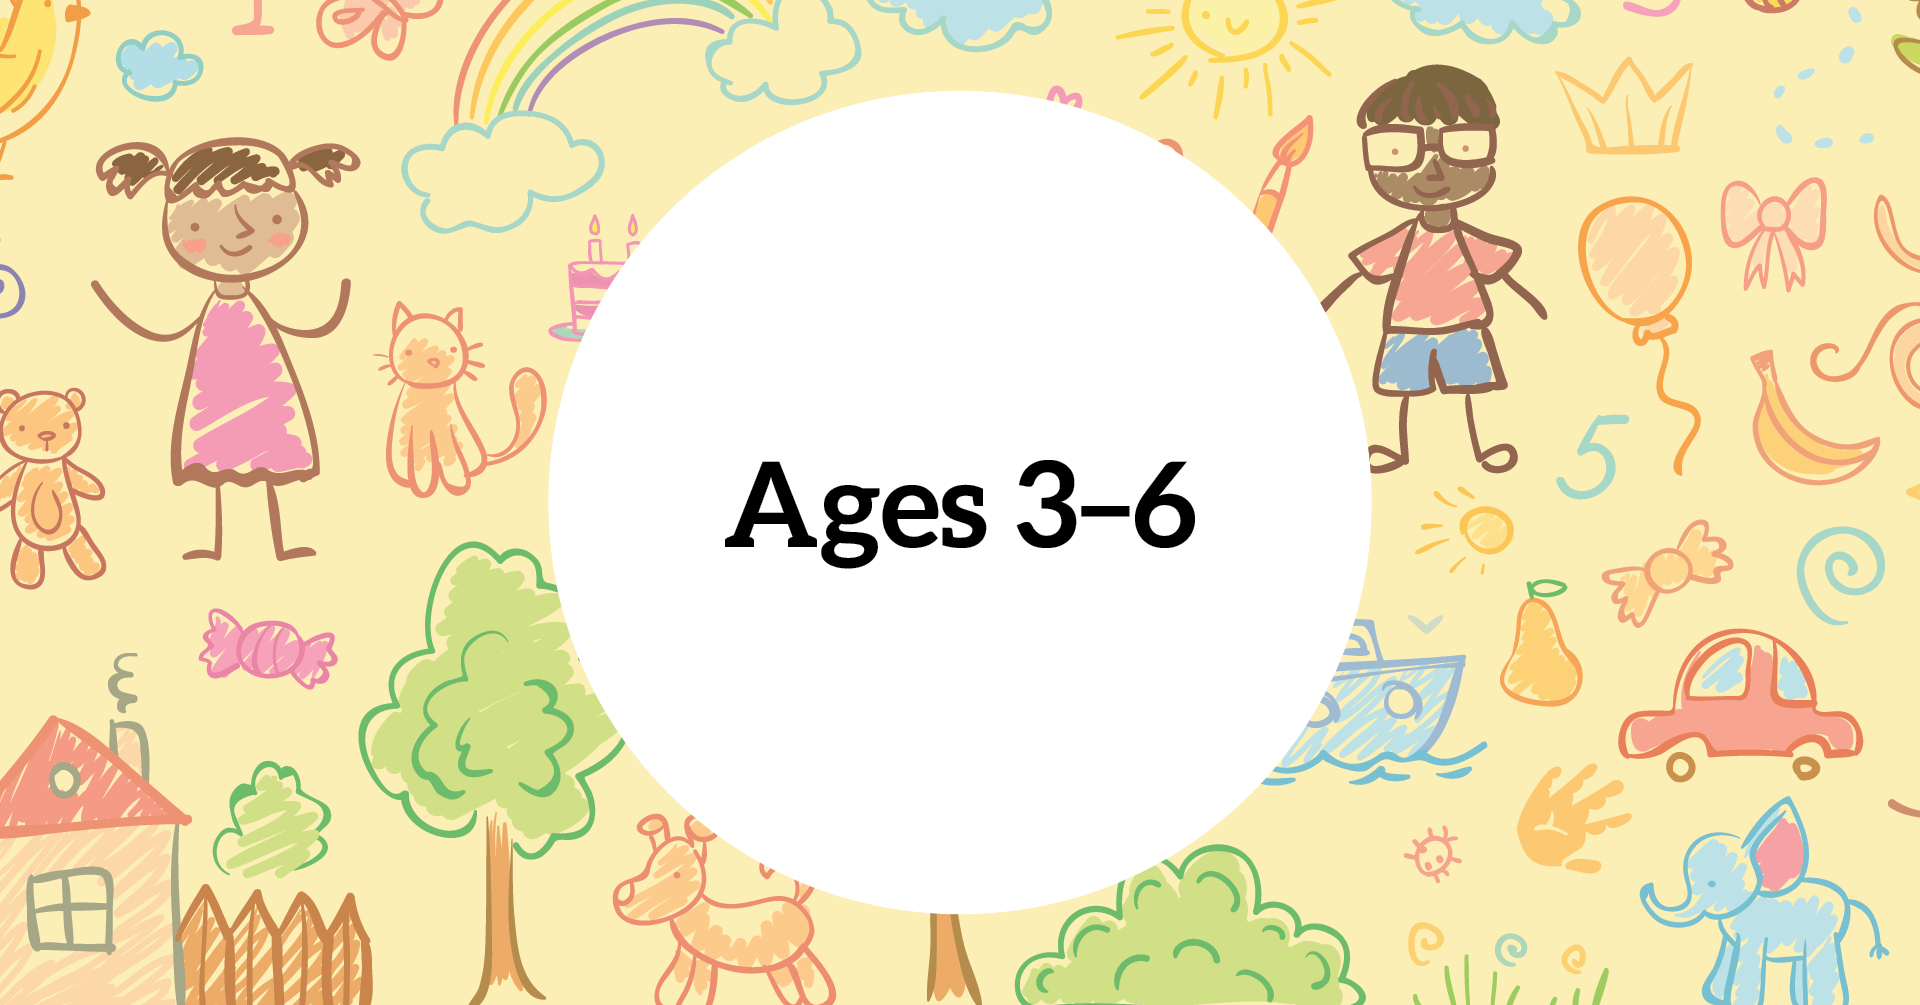 Ages 3-6 with children's dreawings of kids and pets